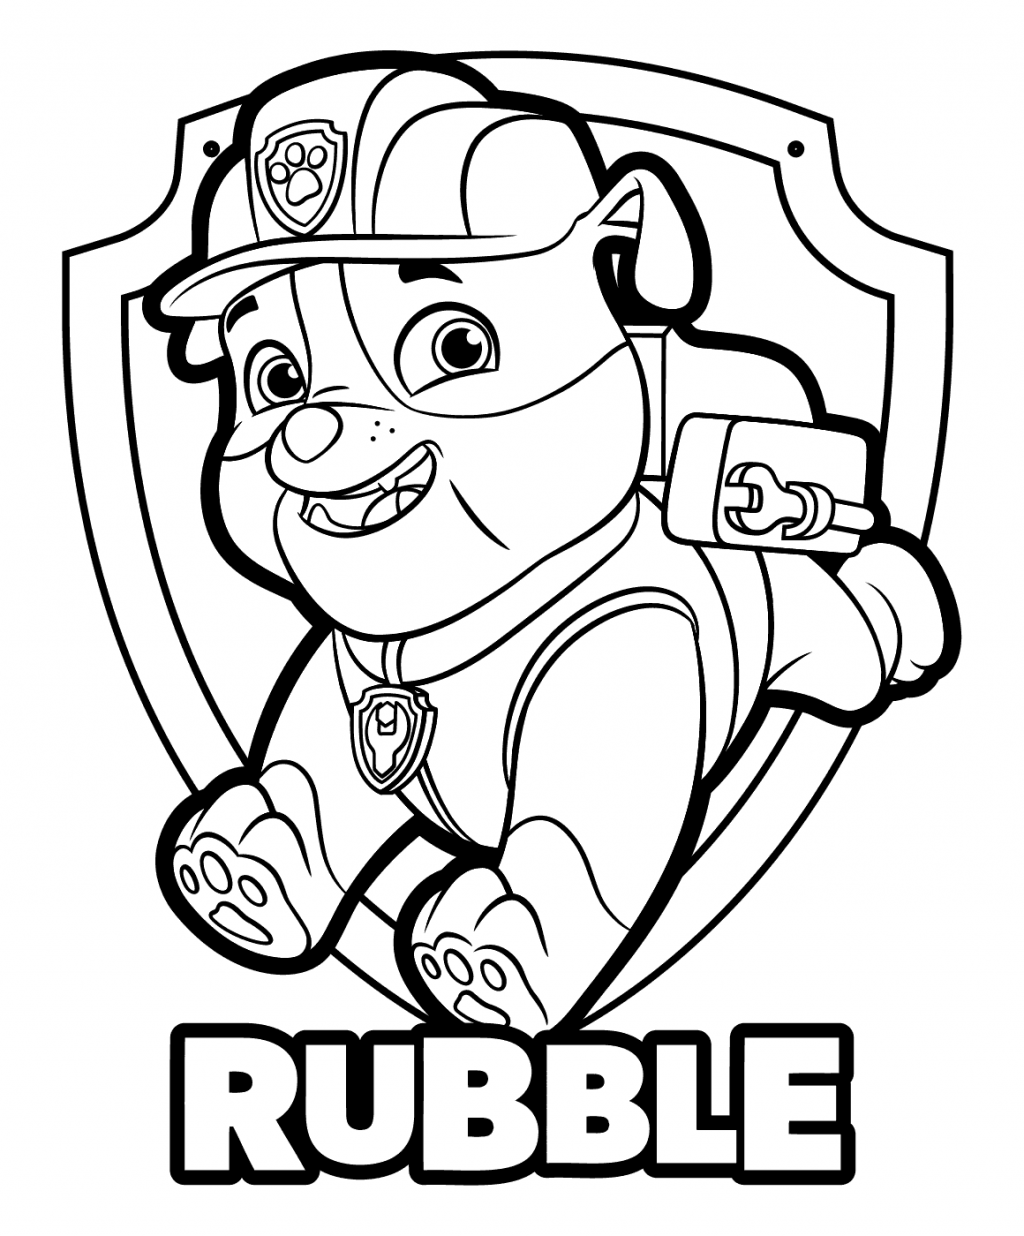 Chase Paw Patrol Coloring Page Coloring Pages